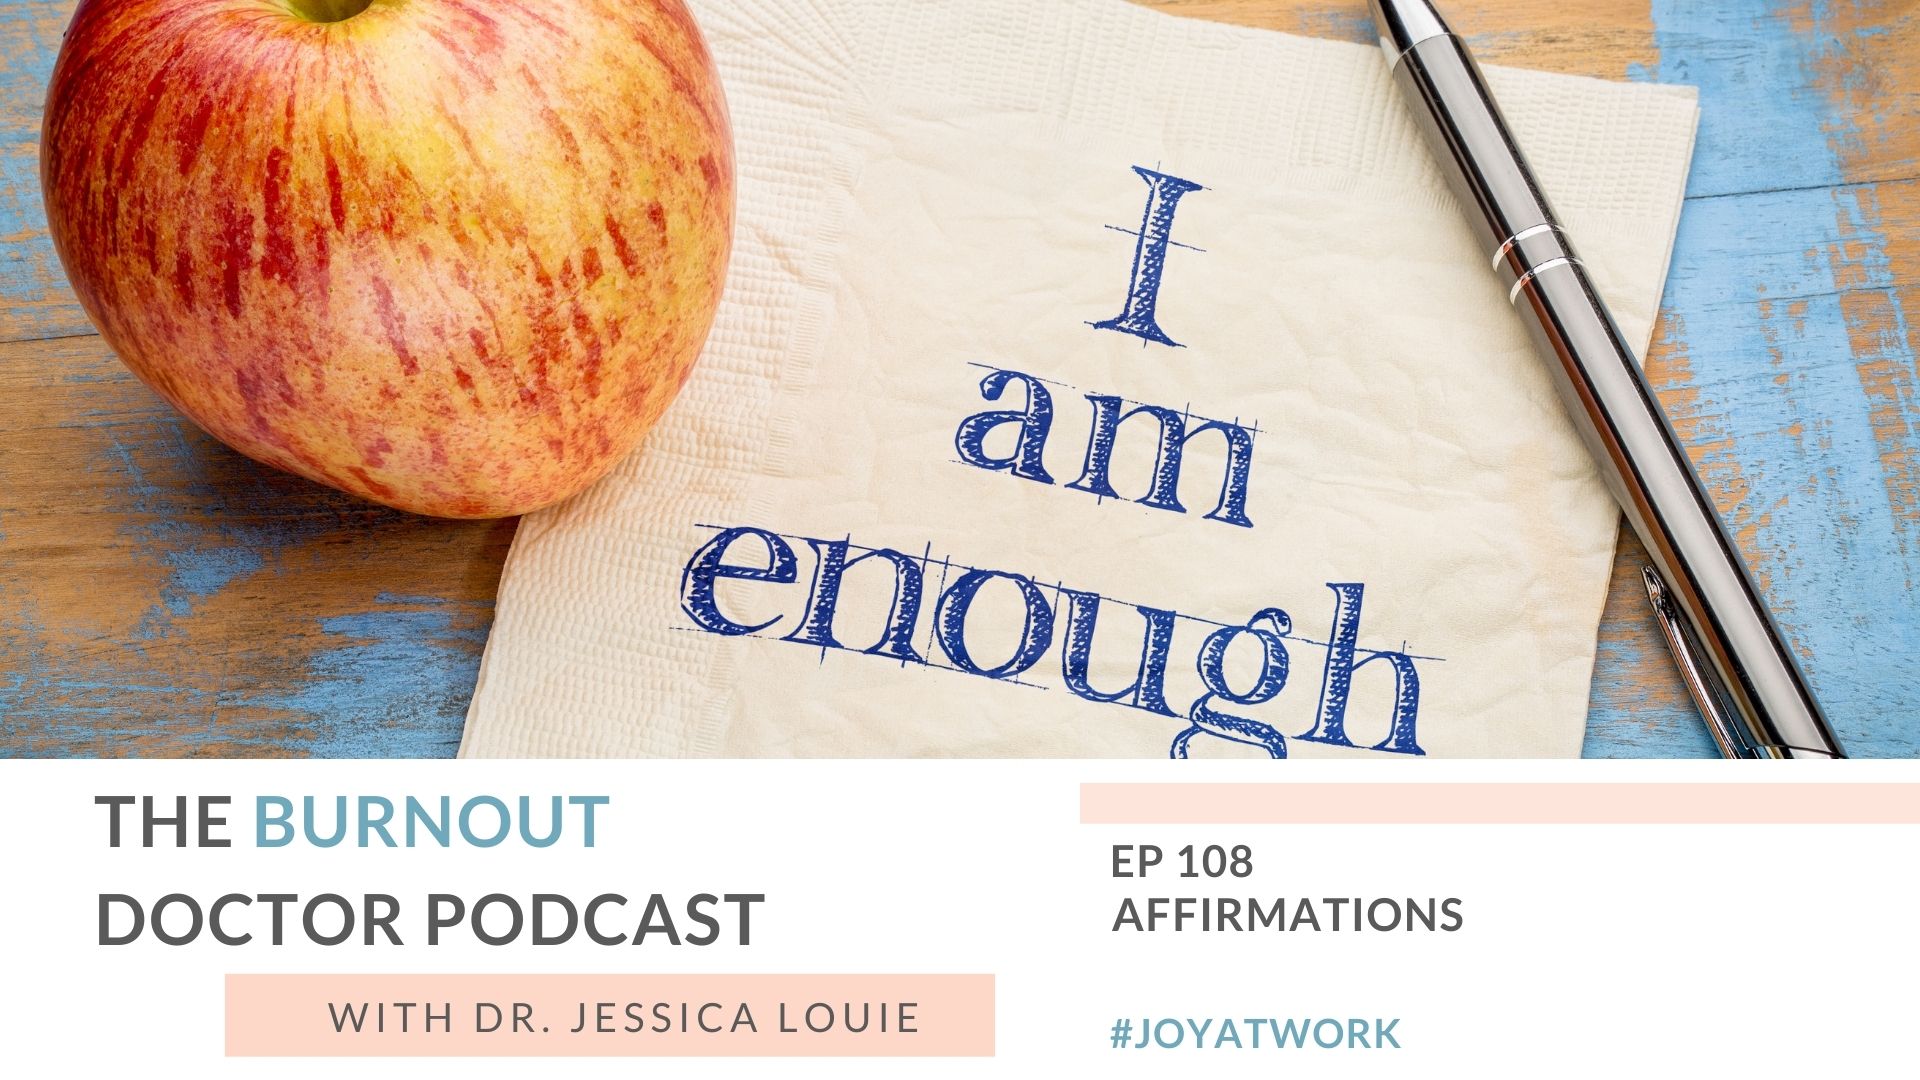 Affirmations for burnout, affirmations for pharmacist burnout, affirmations for success in healthcare, how to start daily affirmations. positive mindset and well-being by Keynote speaker Dr. Jessica Louie of The Burnout Doctor Podcast. Clarify Simplify Align